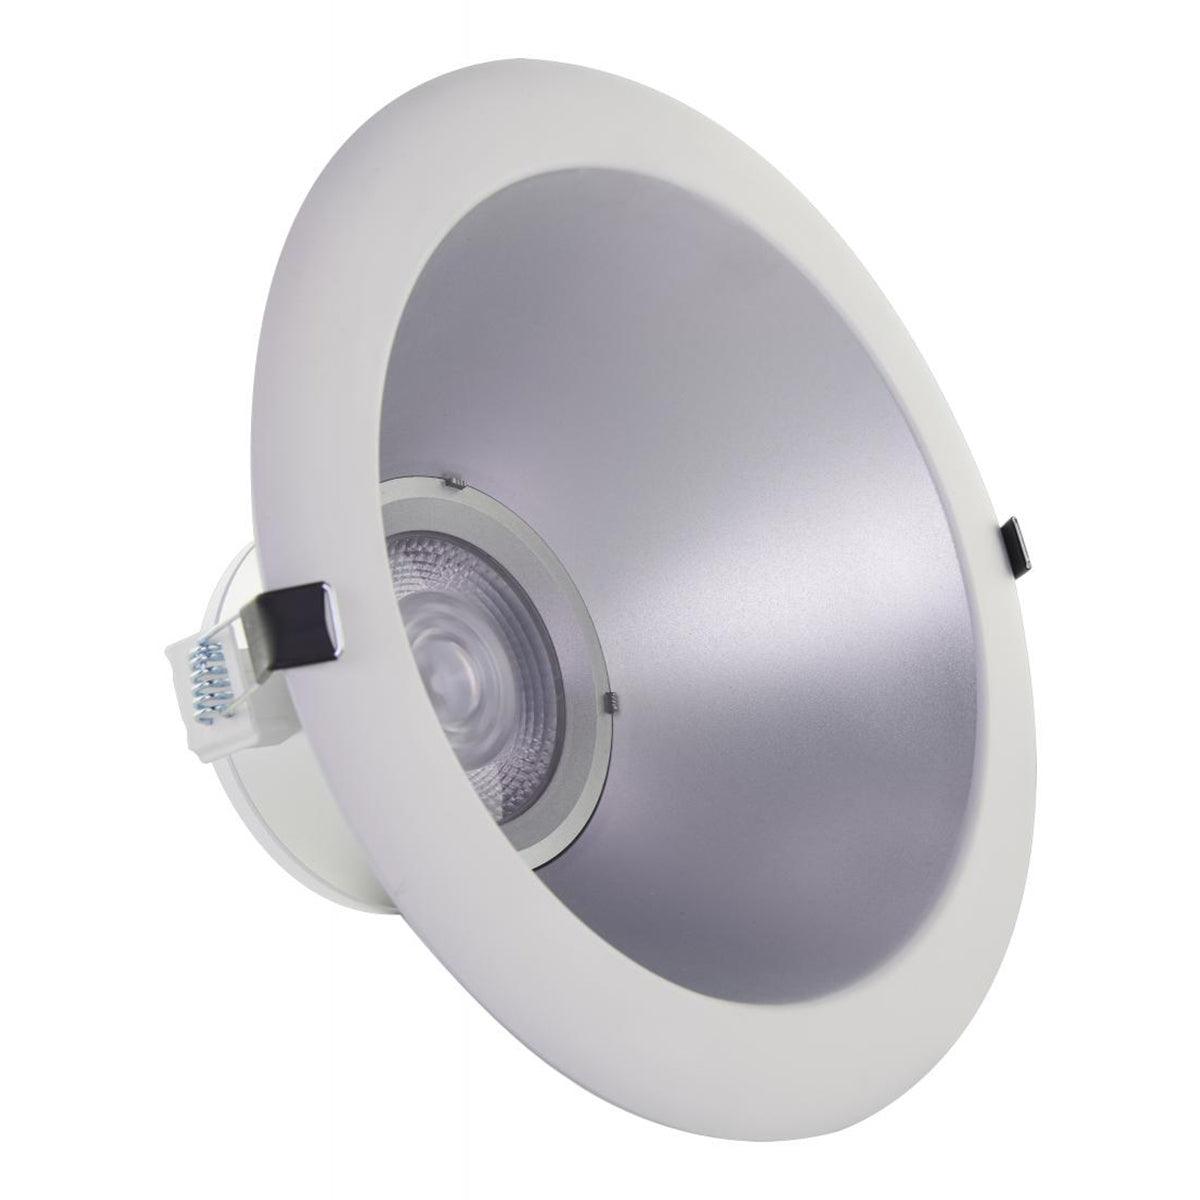 10 In. Commercial Canless LED Recessed Light, 46 Watt, 3500 Lumens, Selectable CCT, 2700K to 5000K, Silver Finish - Bees Lighting